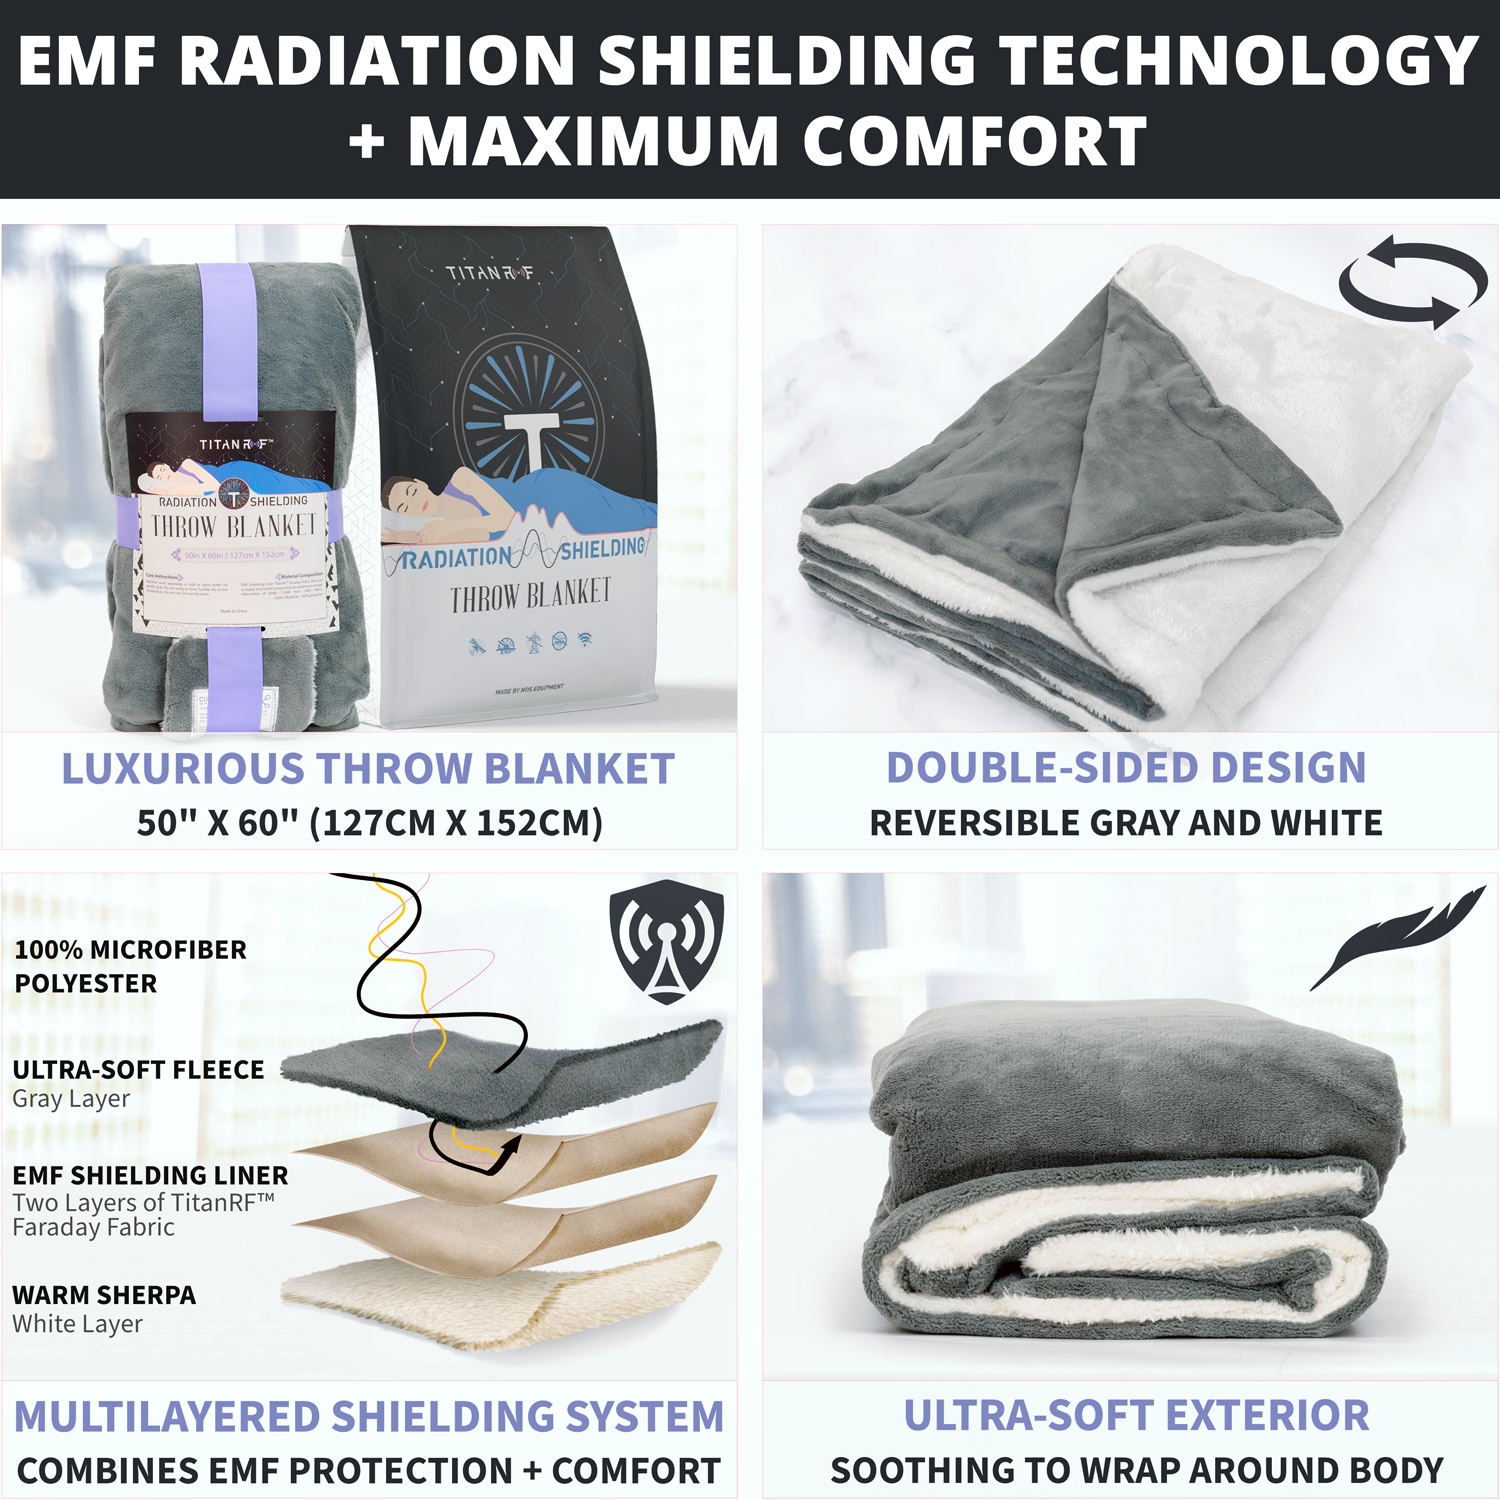 Shielding Blankets: Shield from EMF exposures all night long